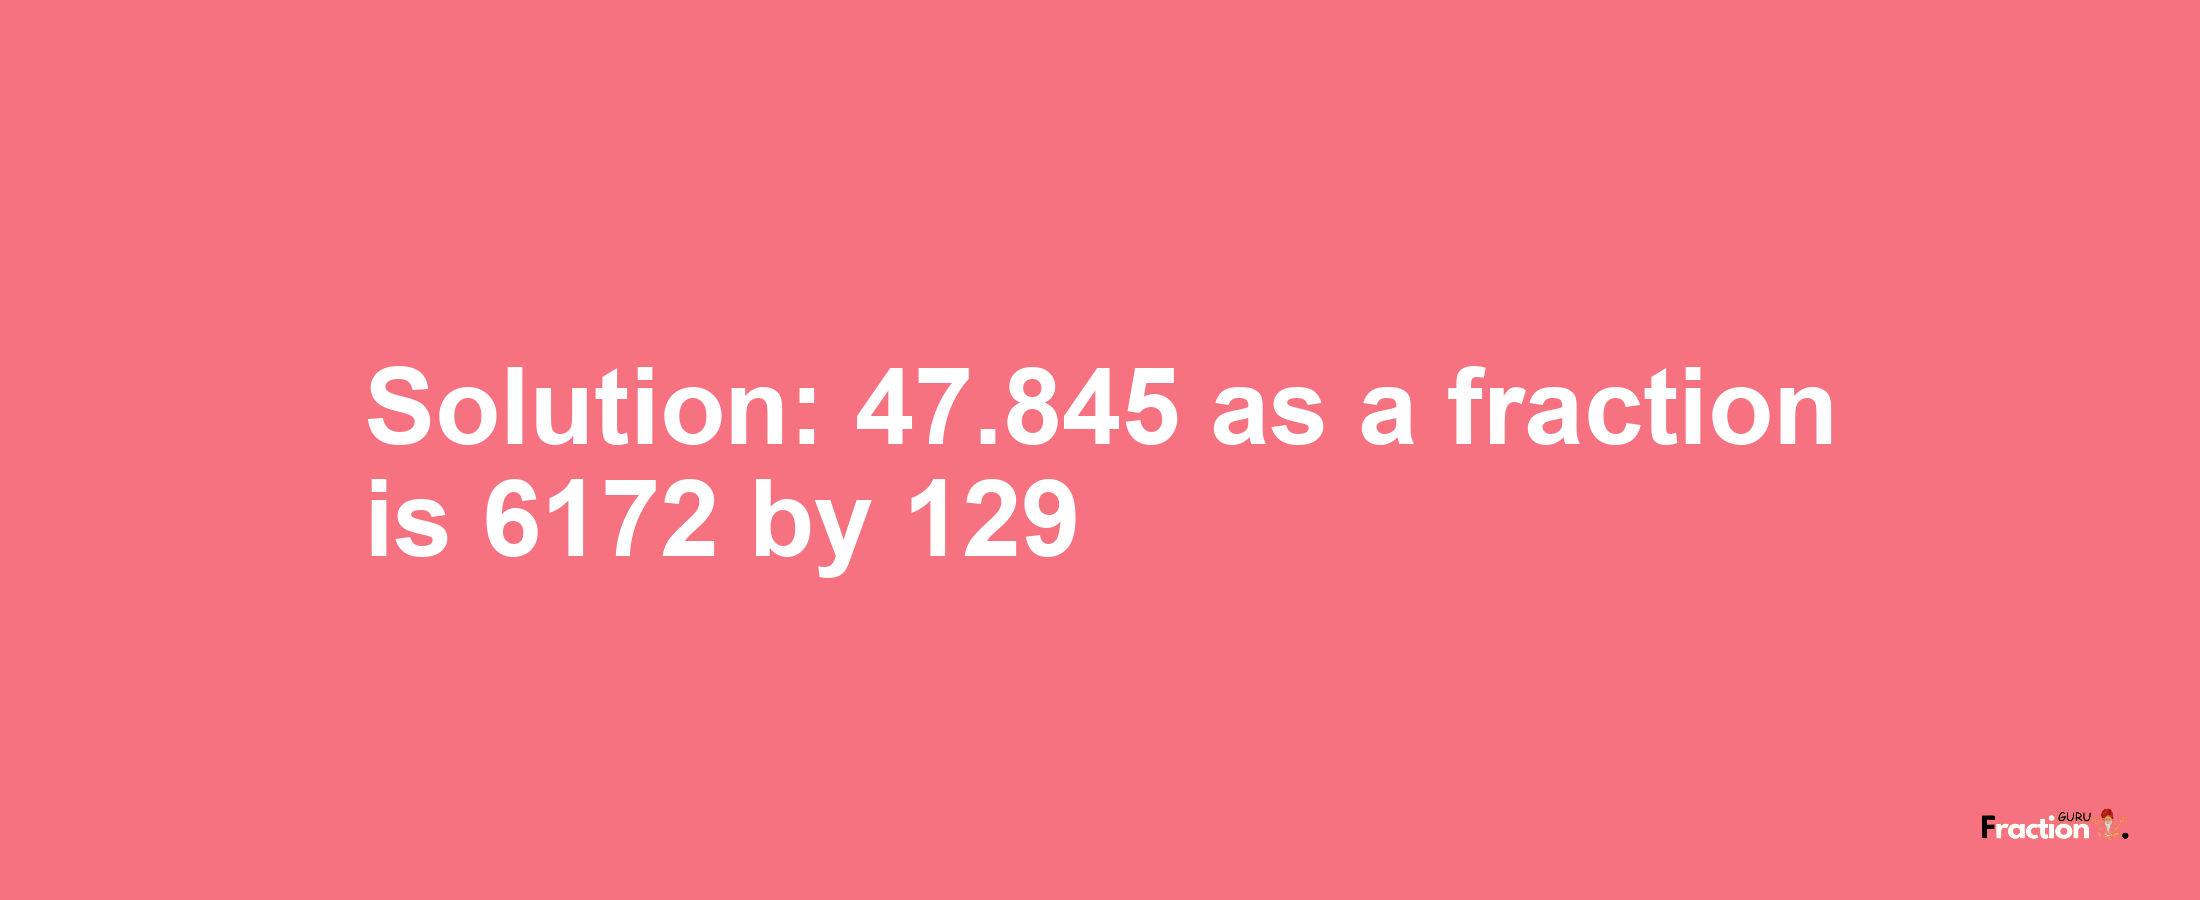 Solution:47.845 as a fraction is 6172/129